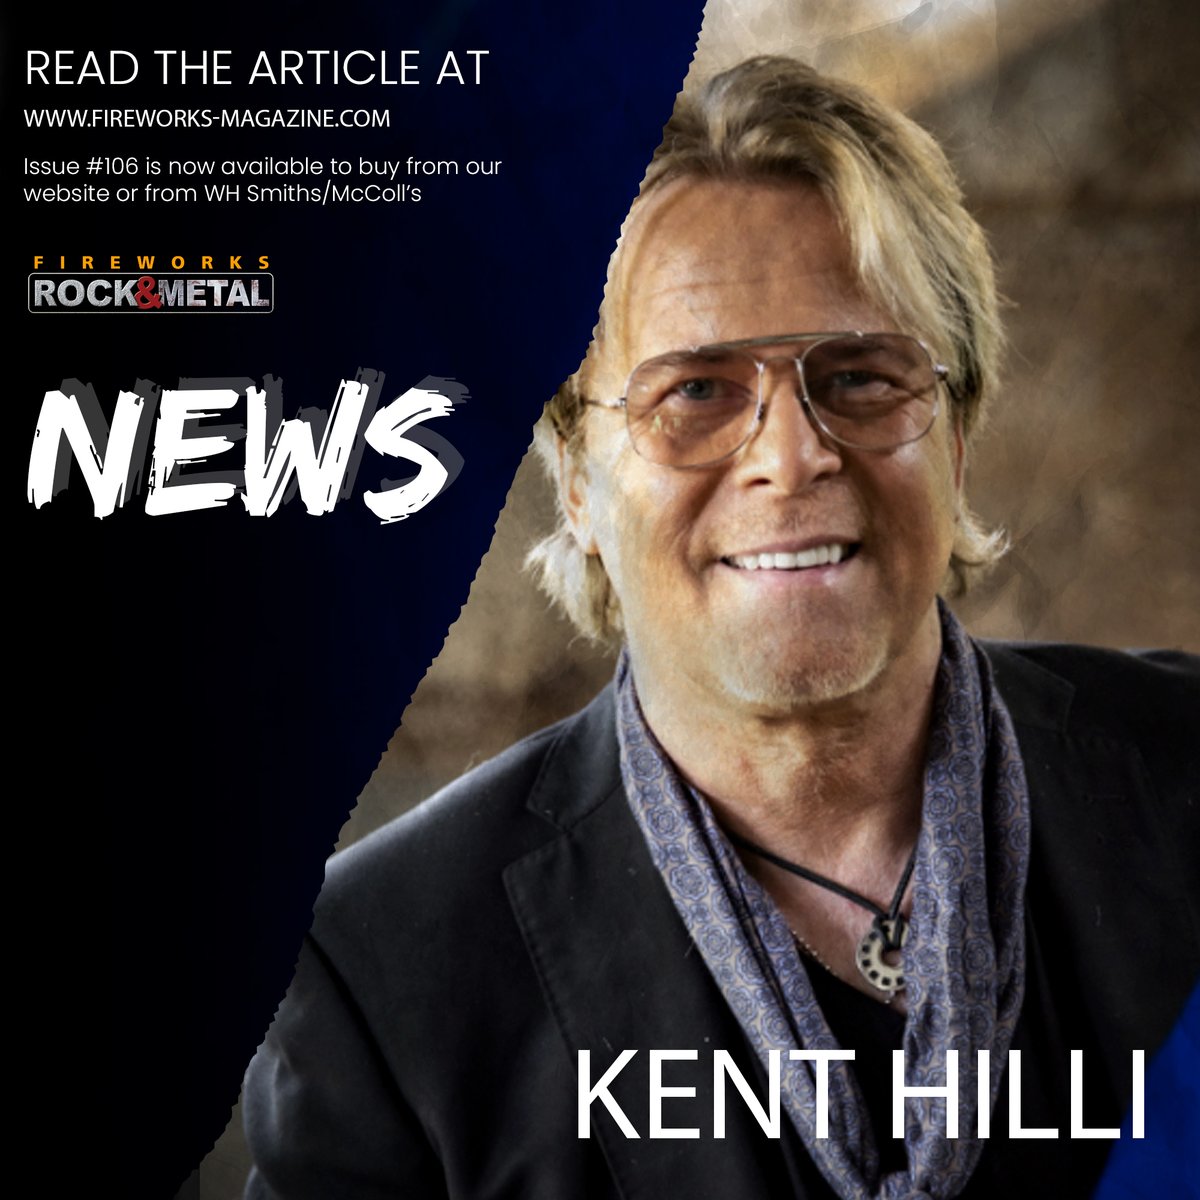 𝗘𝗫𝗖𝗘𝗟𝗟𝗘𝗡𝗧! Kent Hilli Releases New Single & Video ‘Can't Stop Loving You’ via Frontiers Music 𝘙𝘦𝘢𝘥 𝘢𝘣𝘰𝘶𝘵 𝘪𝘵 𝘩𝘦𝘳𝘦: wix.to/bmnpIYj @FrontiersMusic1 -- BUY Issue #106 from fireworks-magazine.com 𝙐𝙆 𝙎𝙪𝙗𝙨𝙘𝙧𝙞𝙥𝙩𝙞𝙤𝙣𝙨 𝙟𝙪𝙨𝙩 £32.